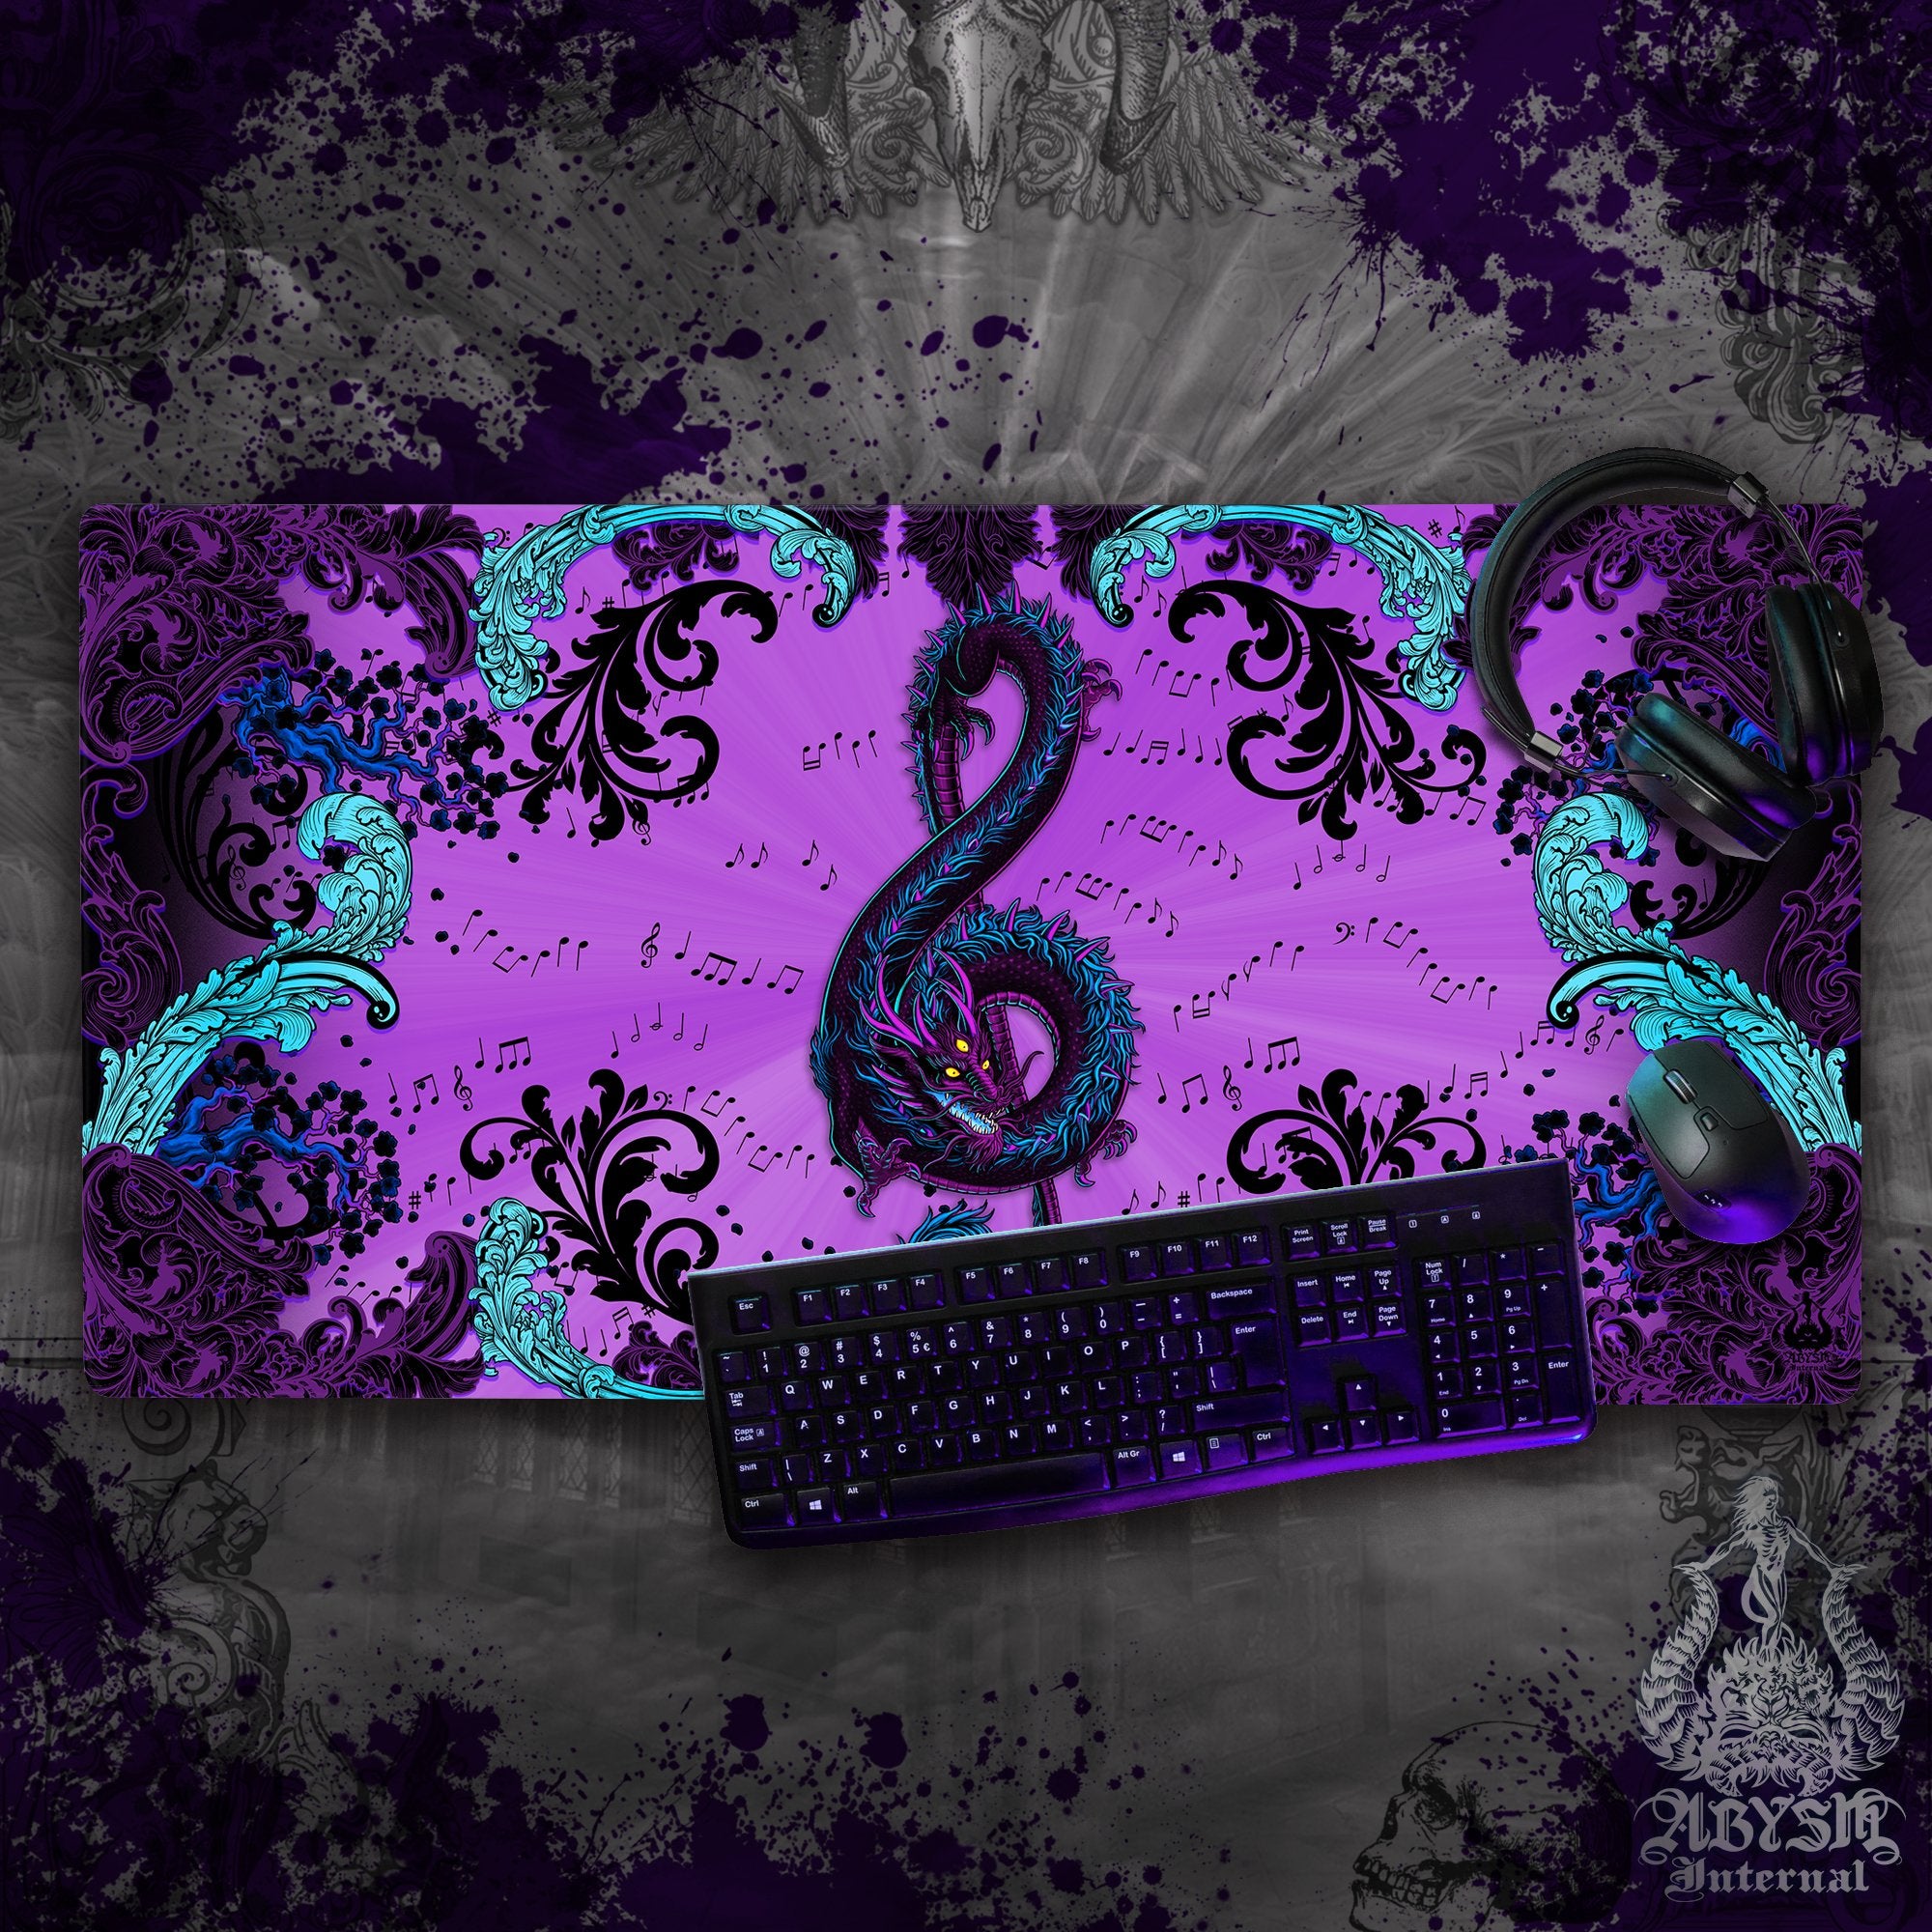 Dragon Gaming Desk Mat, Music Mouse Pad, Pastel Goth Table Protector Cover, Asian Workpad, Treble Clef Art Print - Black Purple - 2 Options - Abysm Internal